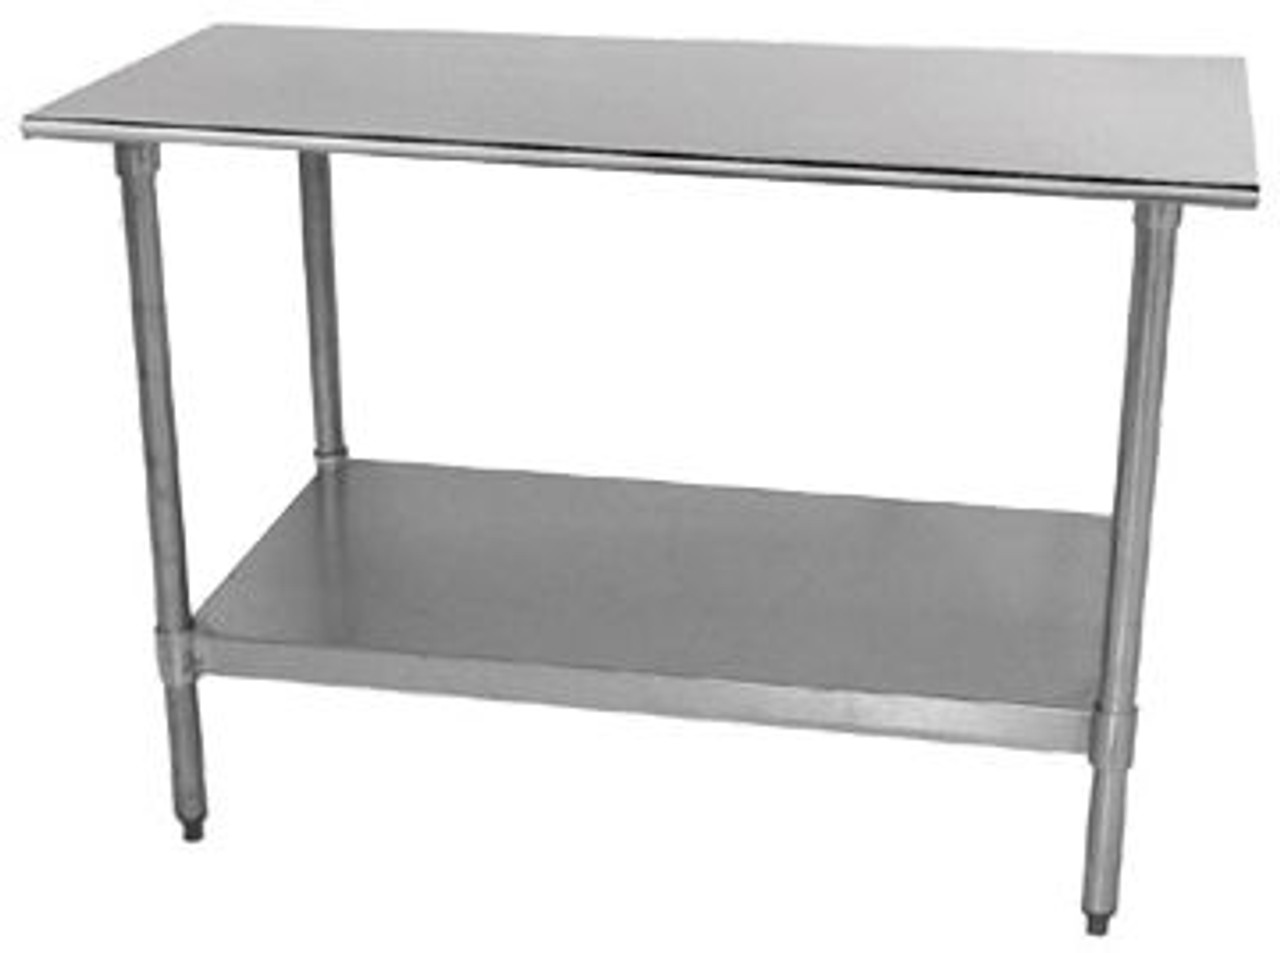 Advance Tabco TTS-243-X 24" x 36" Work Table with Stainless Steel Undershelf